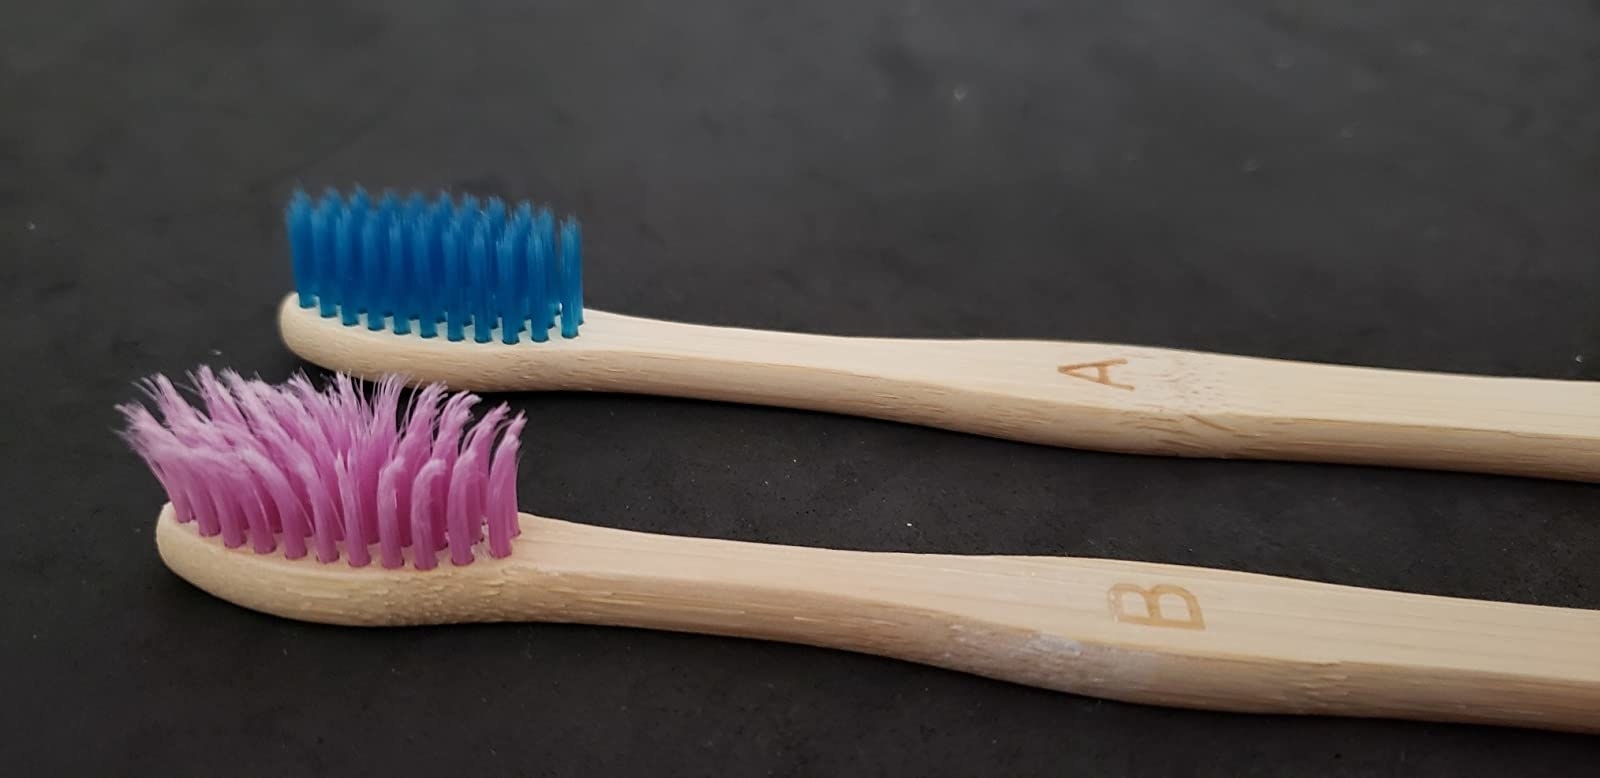 One used toothbrush one new